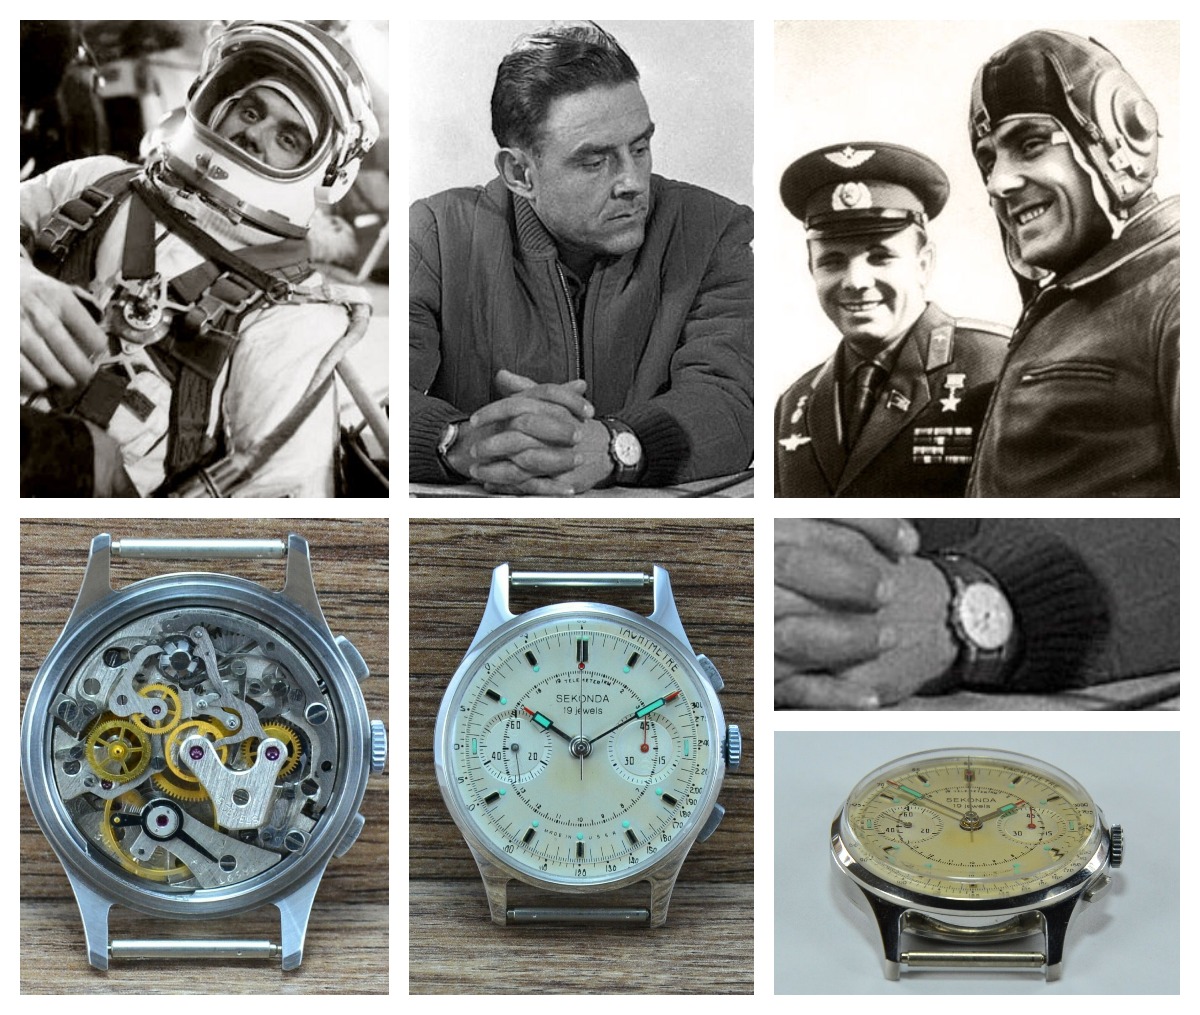 Vladimir Komarov was wearing a Sekonda labeled Strela with a cream dial during his training and the Soyuz-1 mission. Credits: STRELA